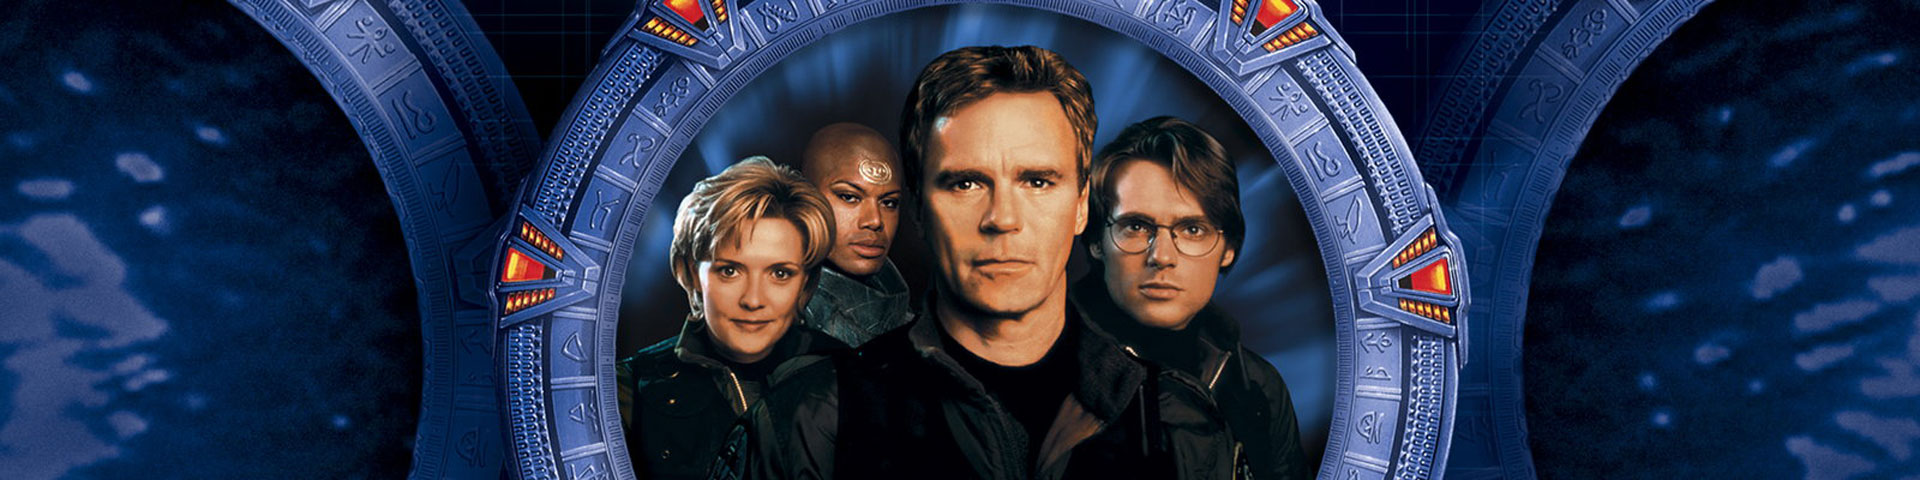 Four actors - one woman and three men - are centered on a large circular Stargate.